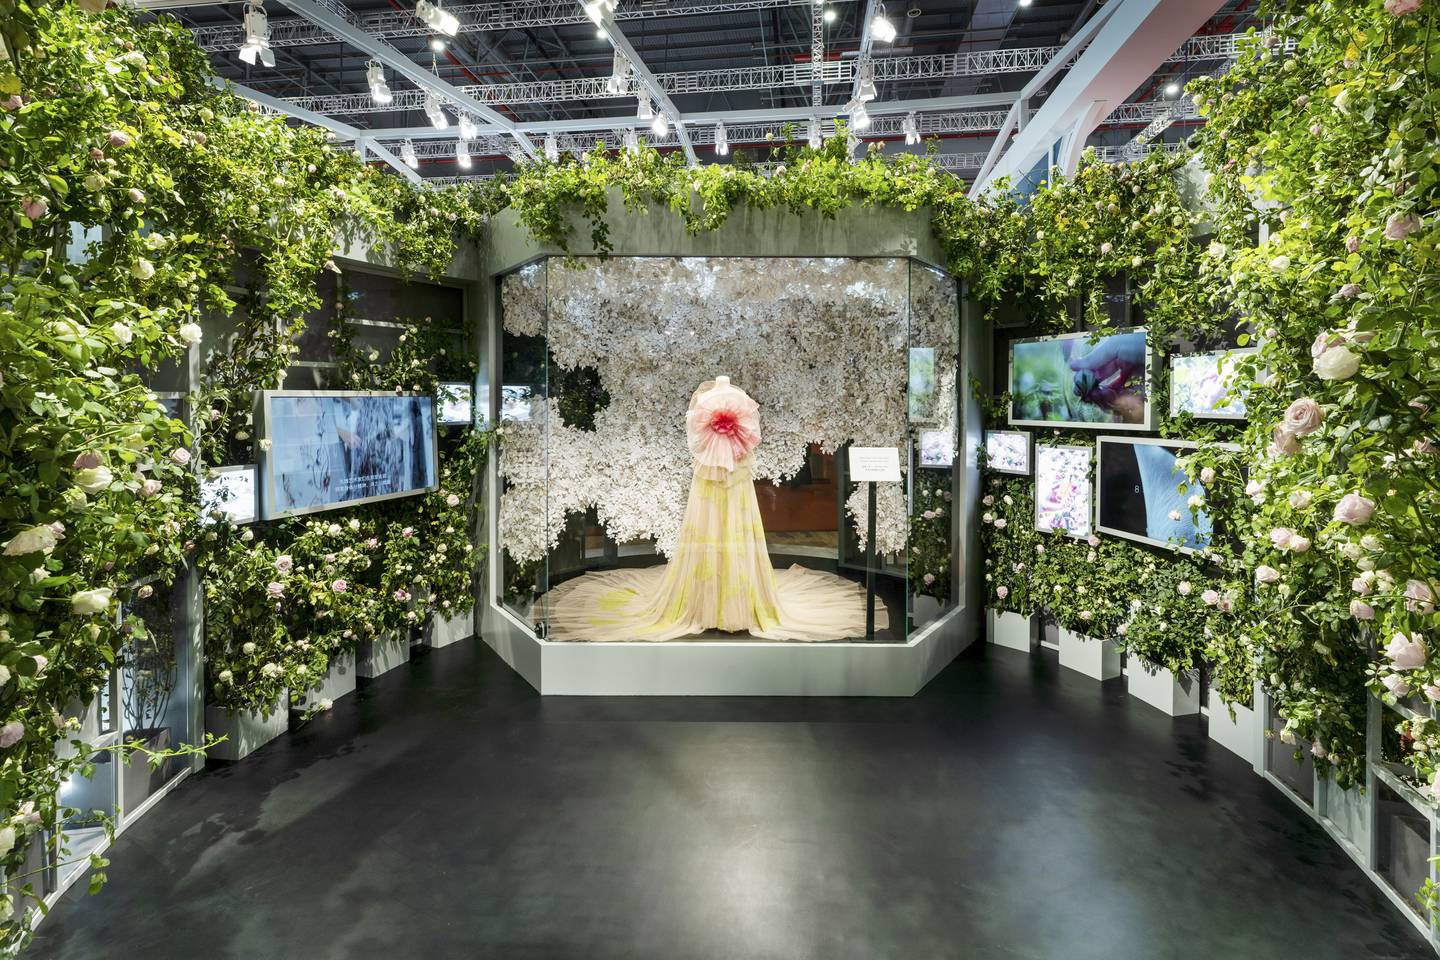 The Dior booth at CIIE is decorated with fresh roses and displays a gown designed by Maria Grazia Chiuri. Christian Dior